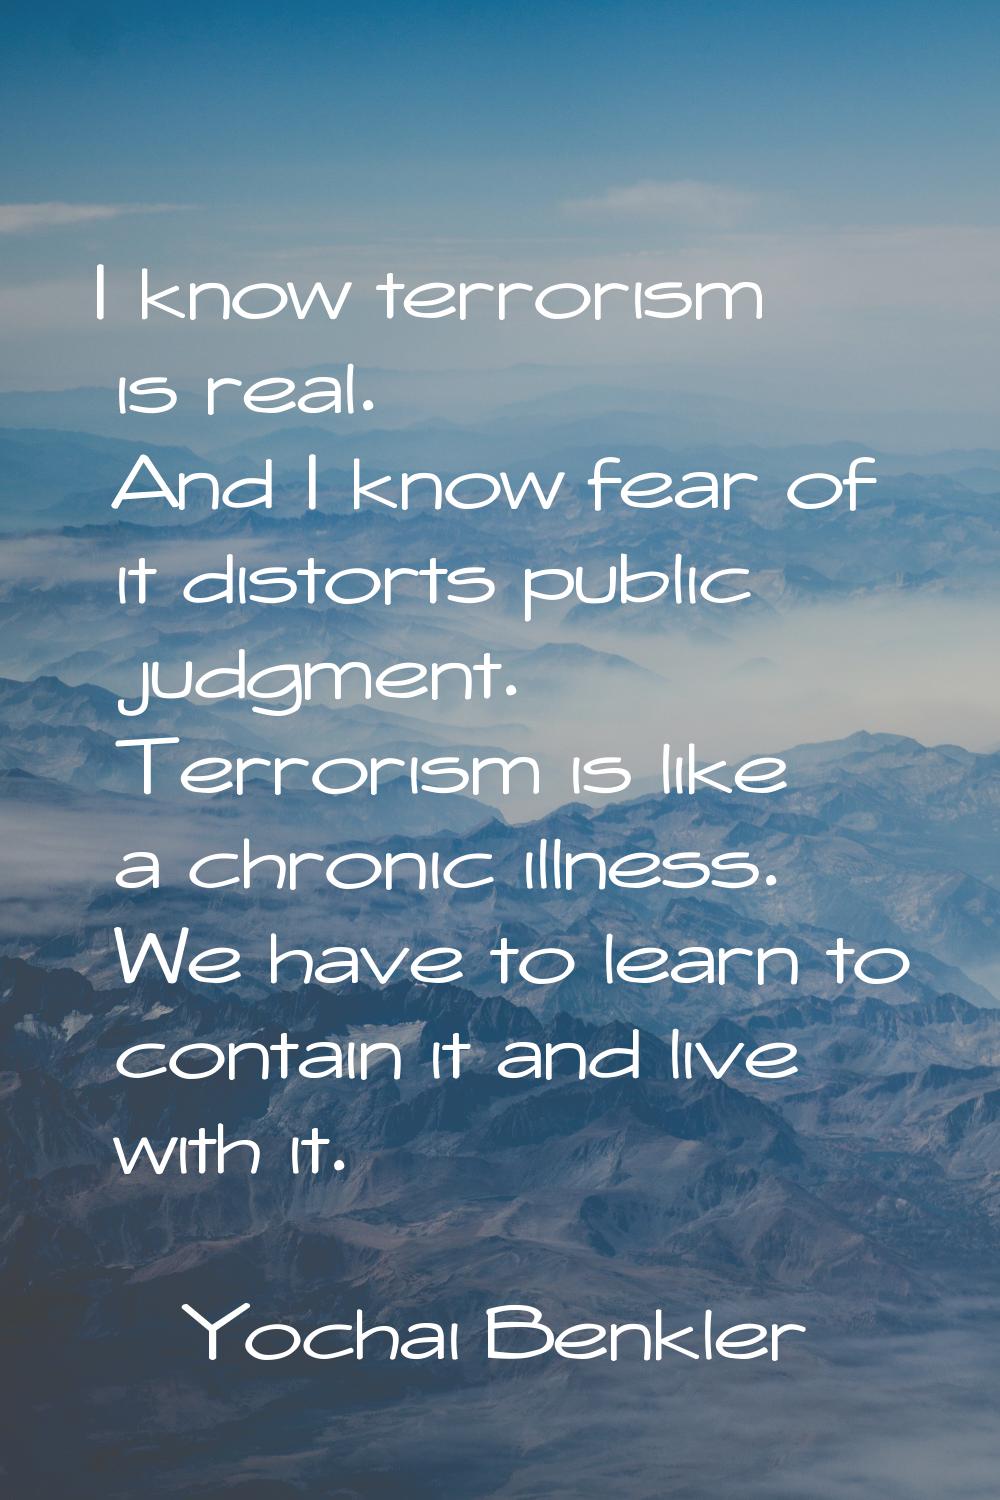 I know terrorism is real. And I know fear of it distorts public judgment. Terrorism is like a chron